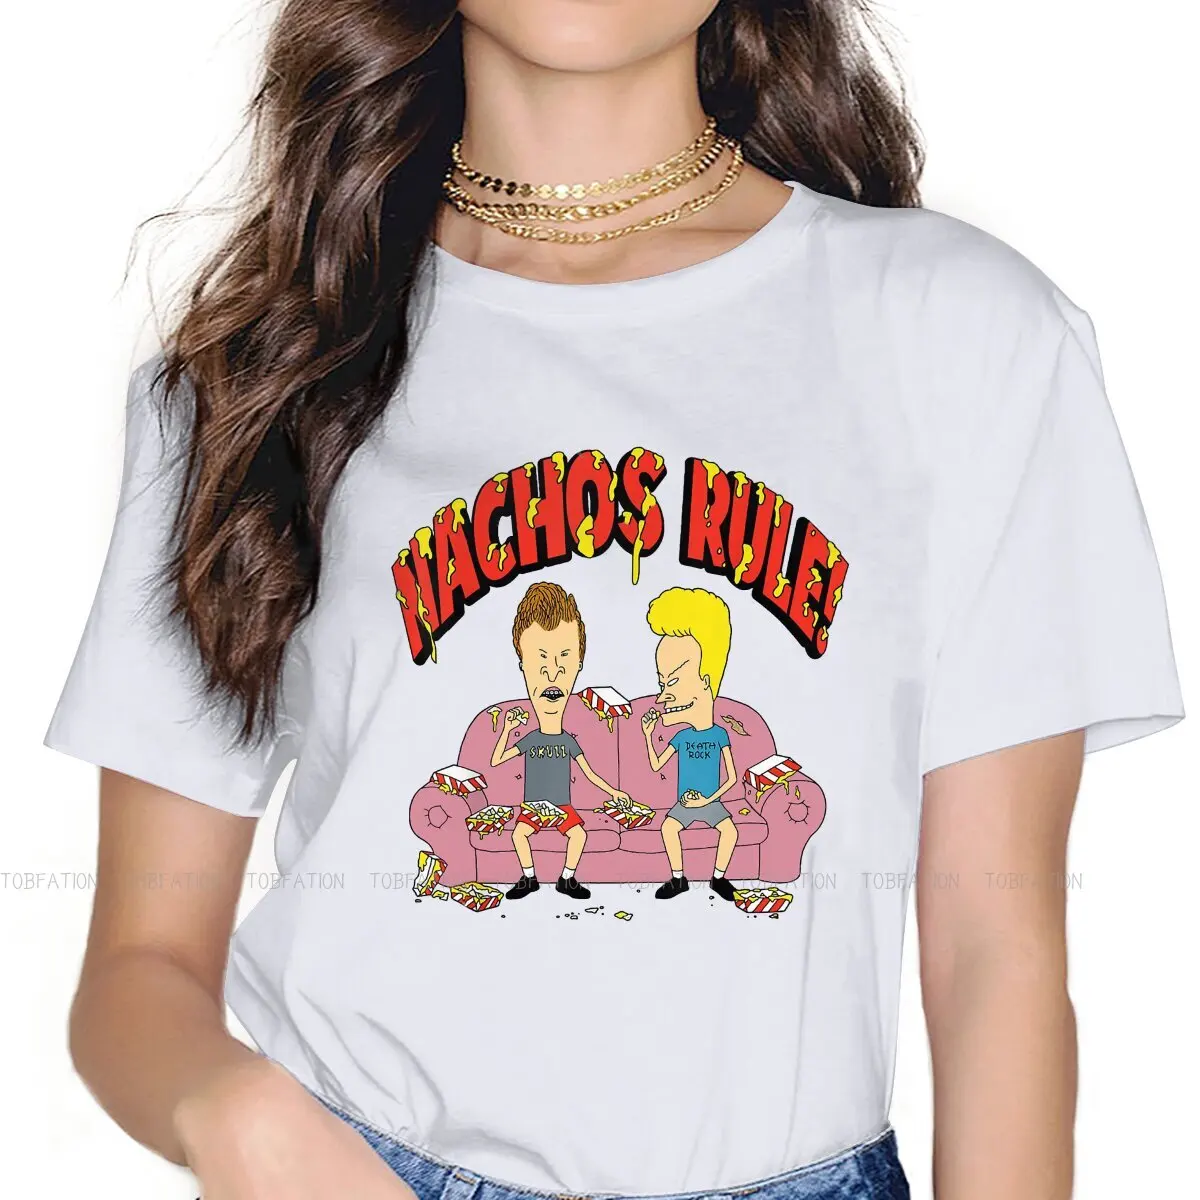 

Nachos Rule Women Tshirts Beavis and Butthead Funny Sarcastic Cartoon Grunge Vintage Female Clothing Big size Cotton Graphic